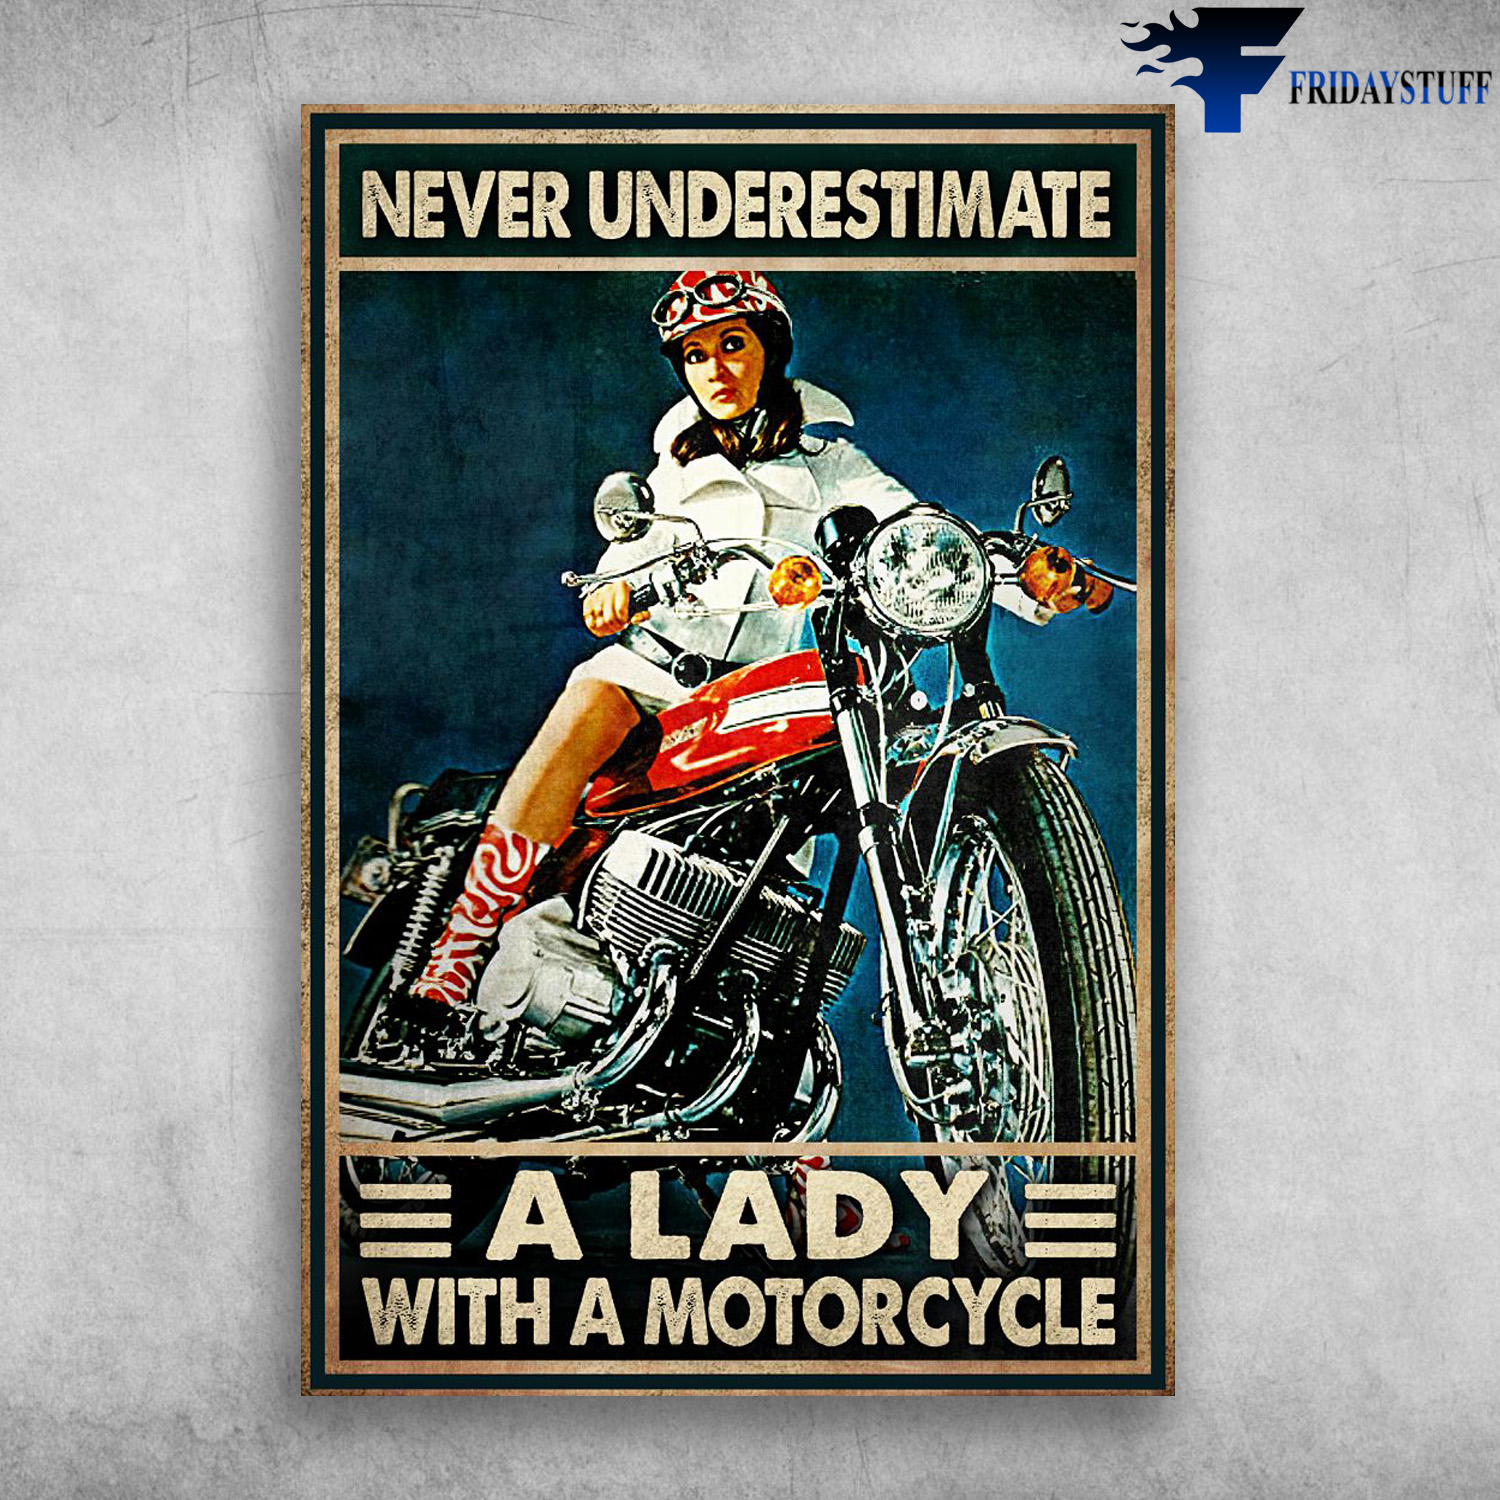 Lady Riding Motorcycle - Never Underestimate, A Lady With A Motorcycle